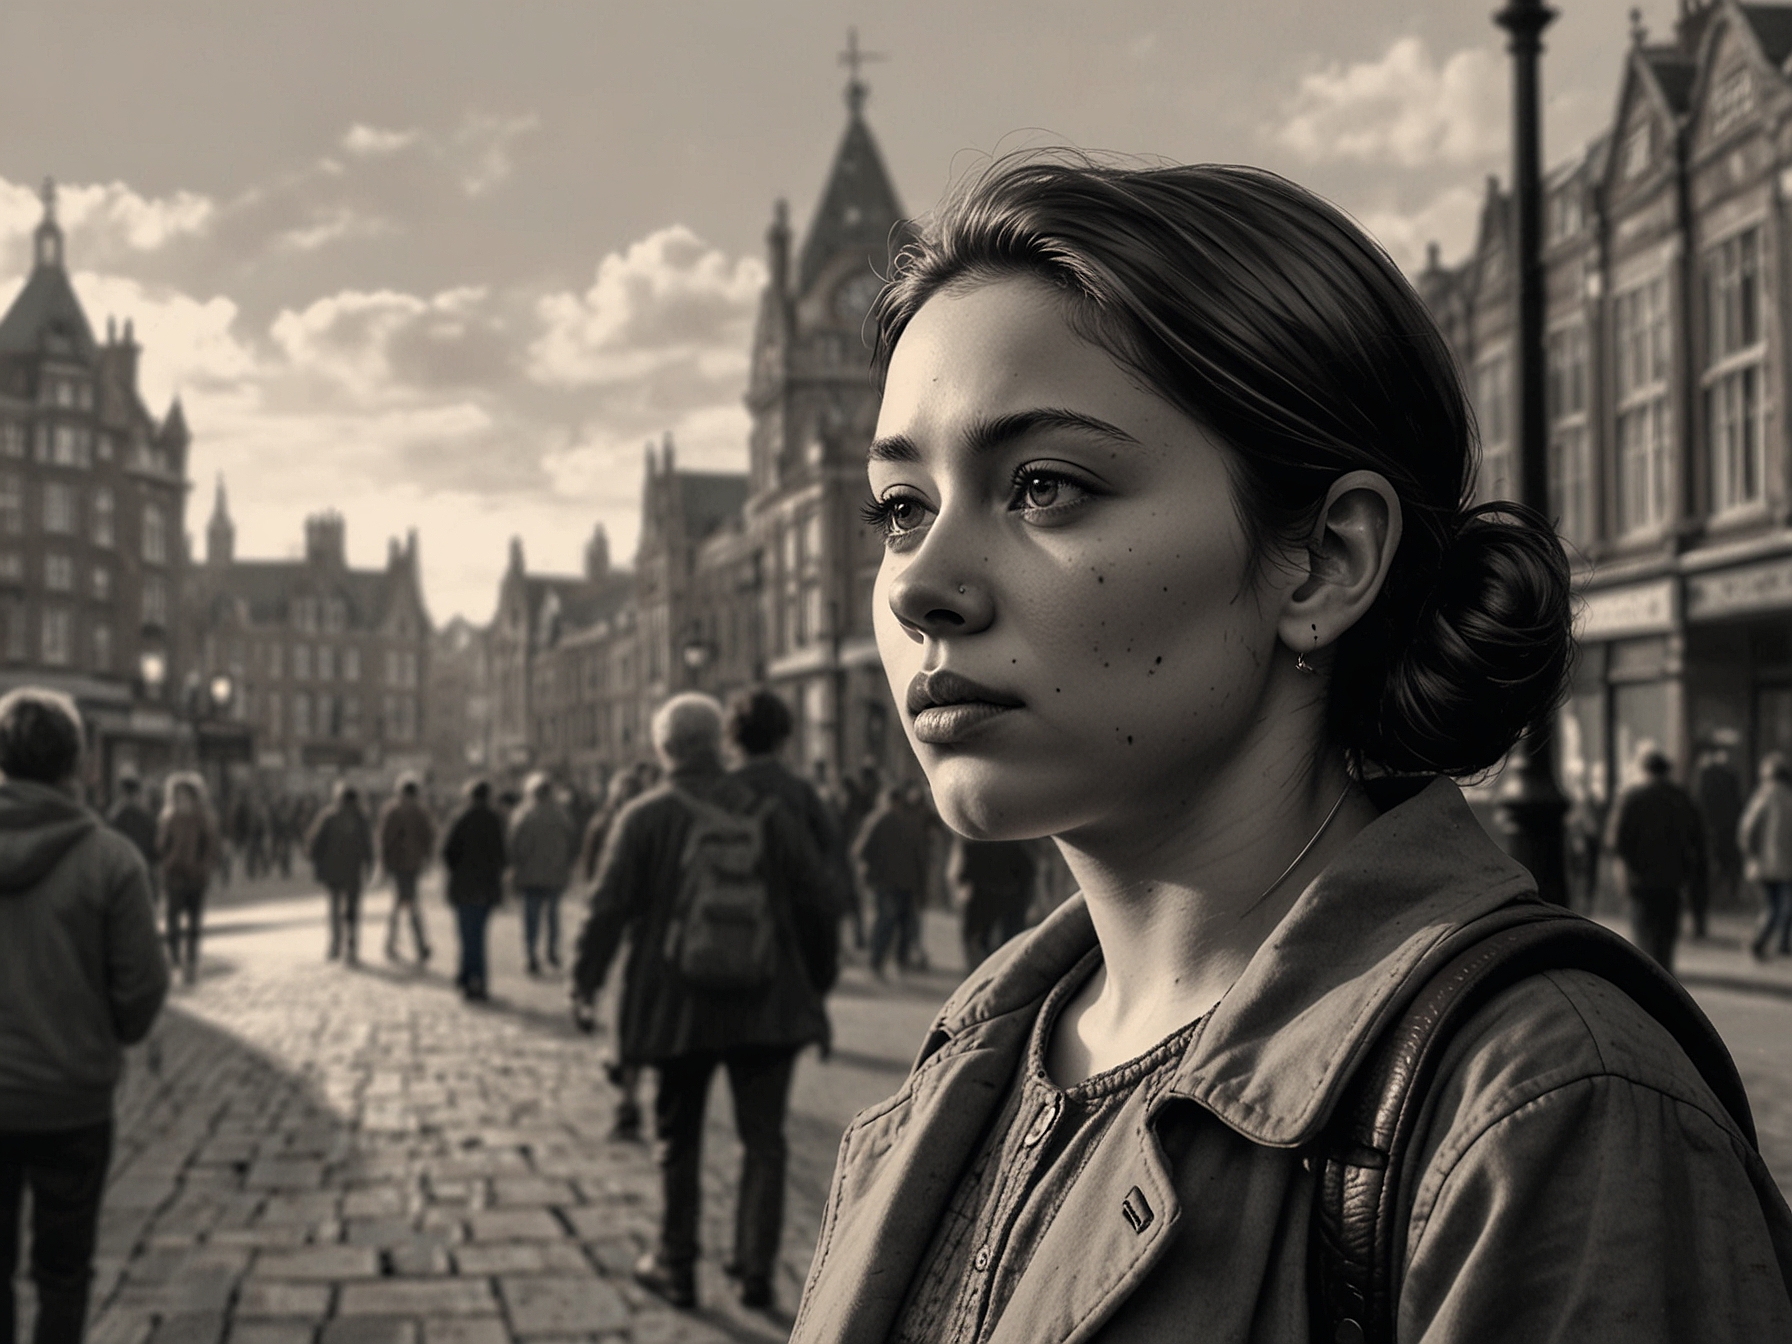 Maya, looking over her shoulder with a worried expression, stands in Albert Square as residents in the background whisper and glance at her suspiciously.